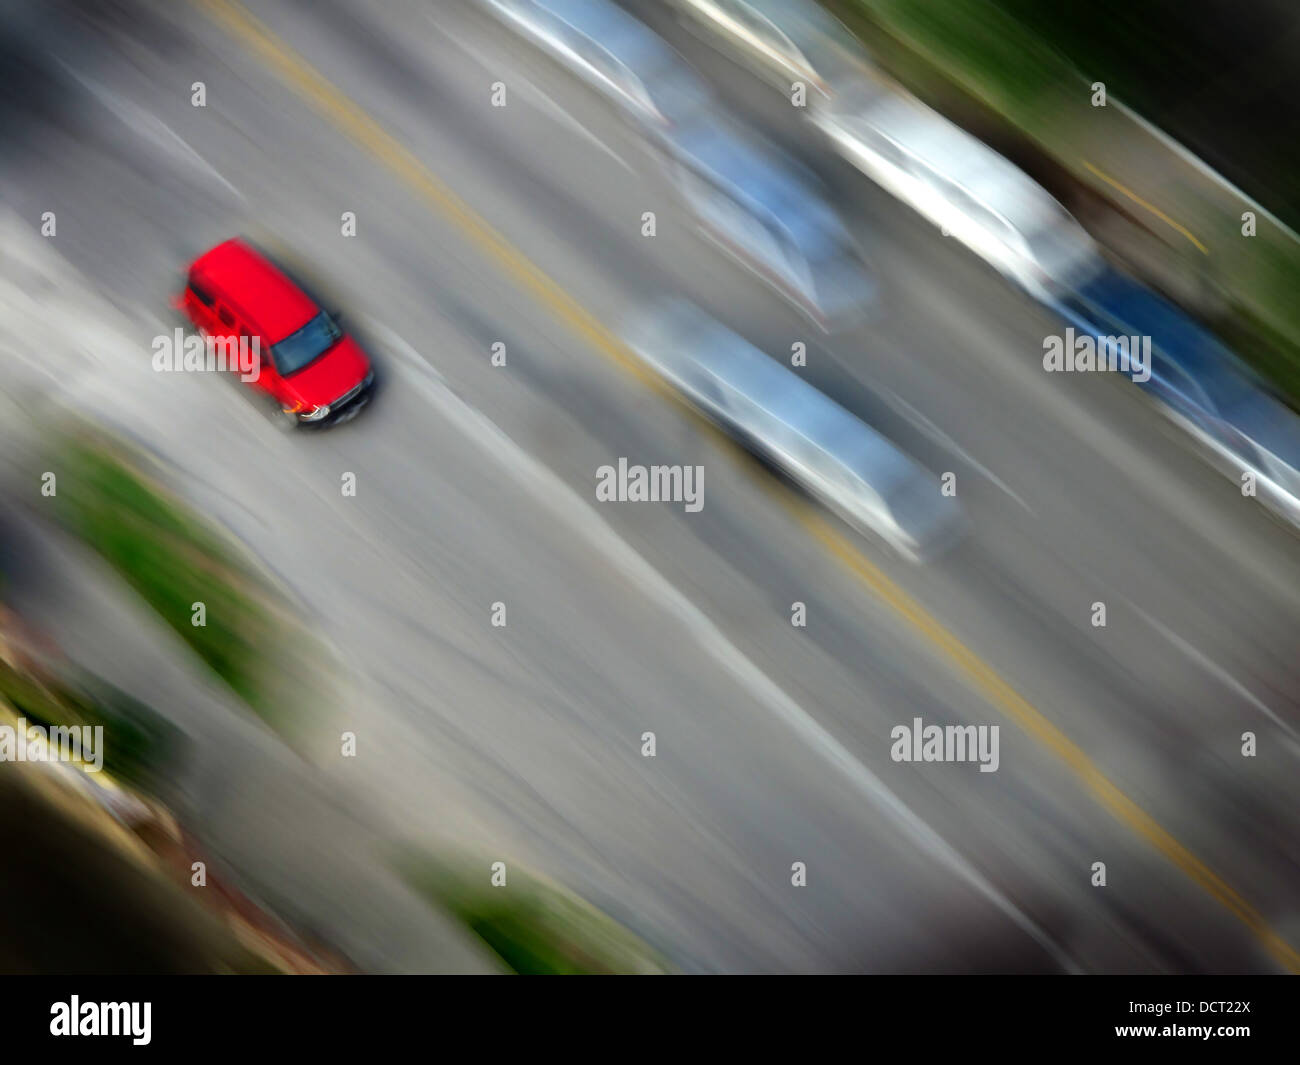 Speedy red car driving along road with blurred background Stock Photo